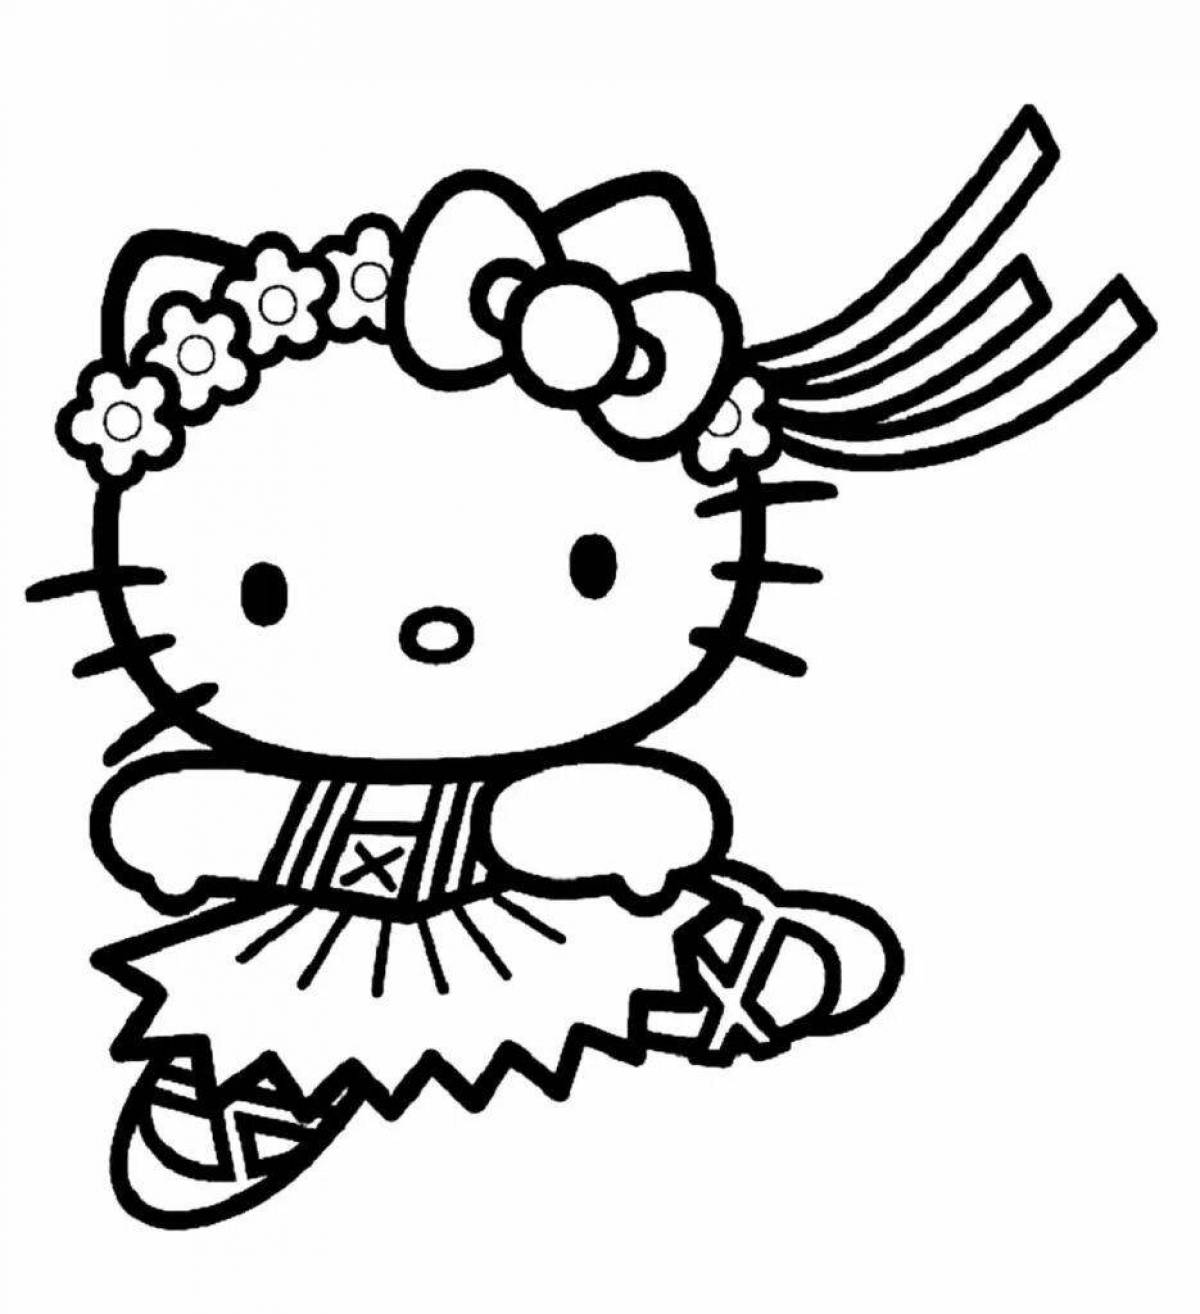 Fancy hello kitty coloring book